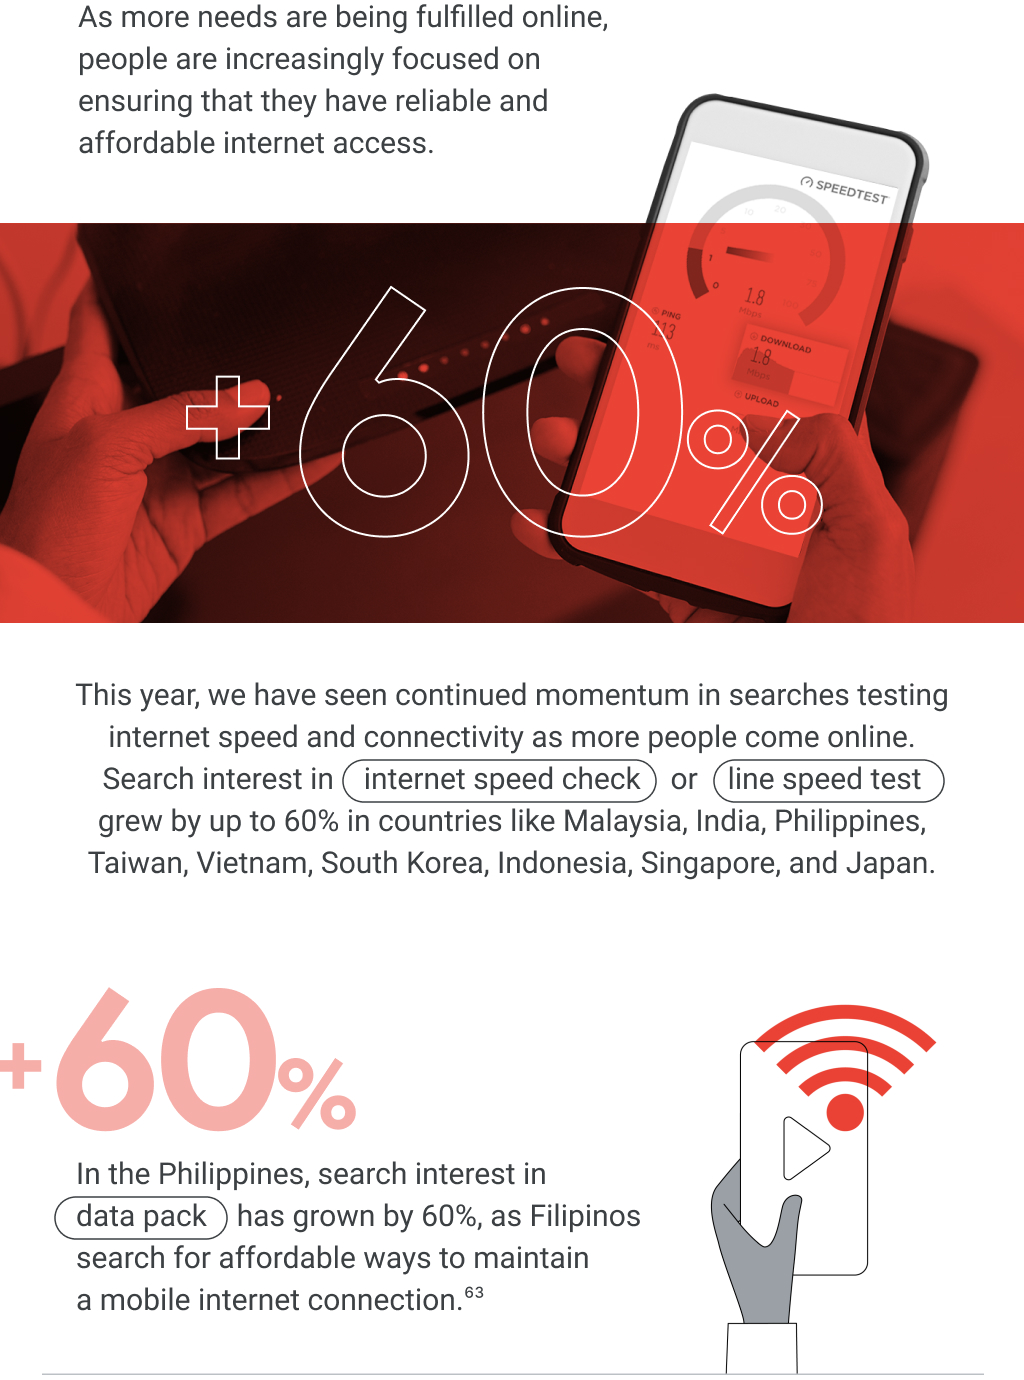 As more needs are fulfilled online in 2021, searches for internet speed & connectivity rise. +60% searches for “internet speed check” or “line speed test” in many APAC countries. +60% searches for “data pack” in the Philippines.